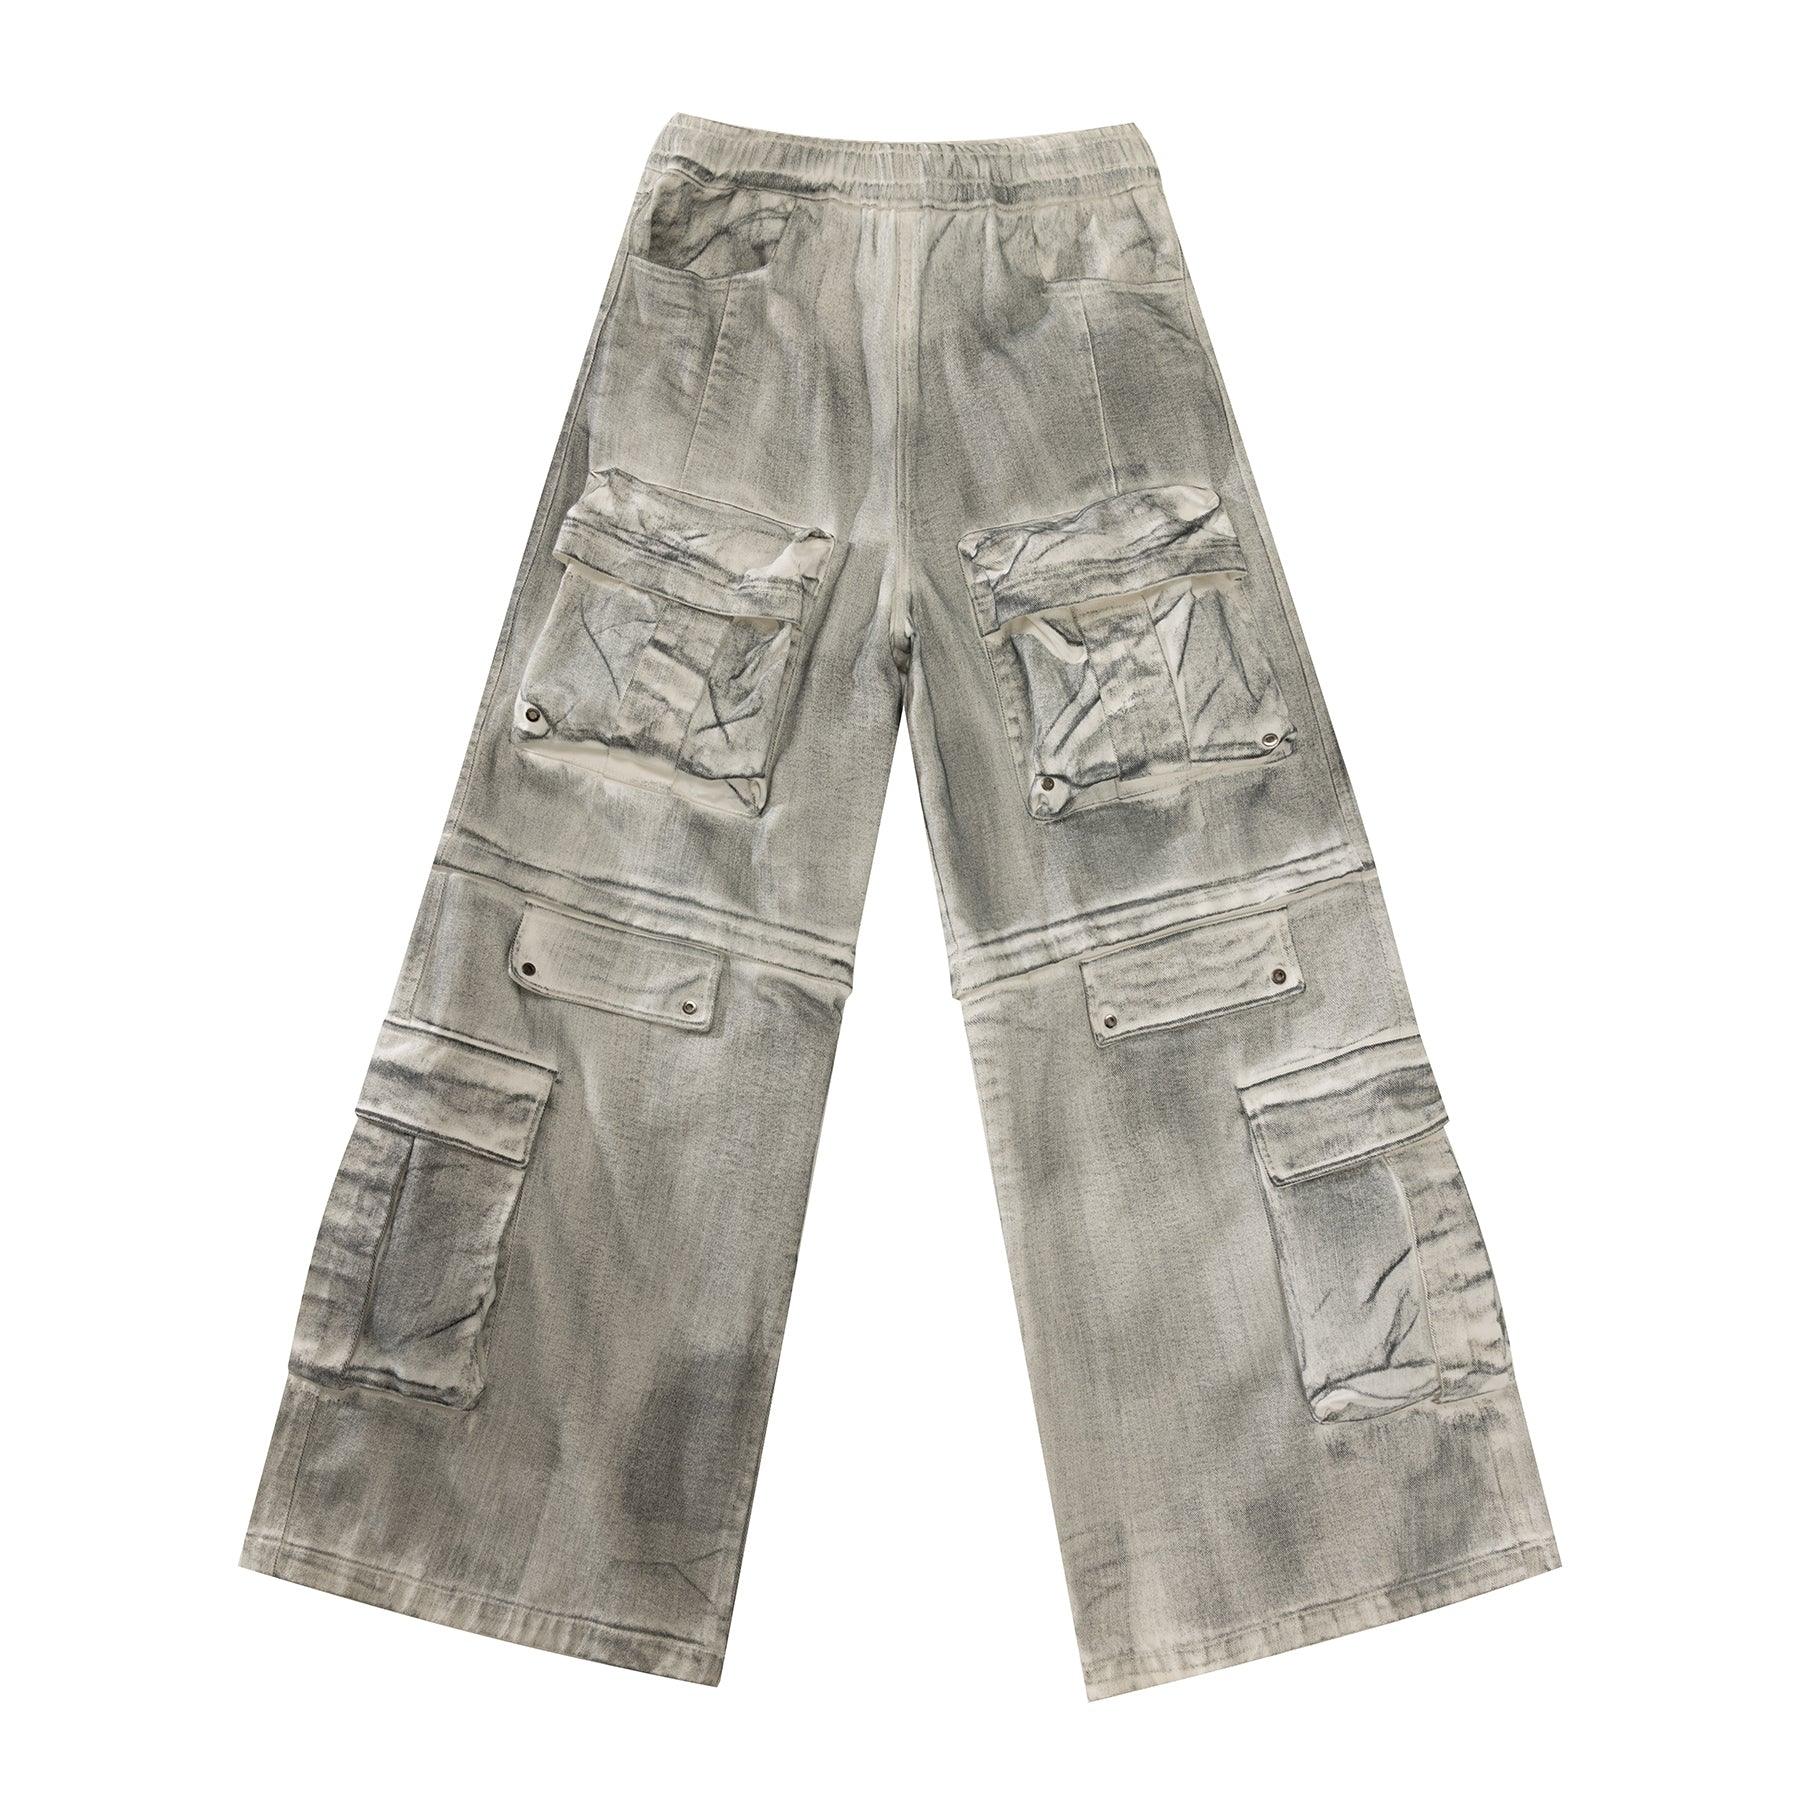 Dirty Dyed Cargo Pants with Removable Pockets - chiclara